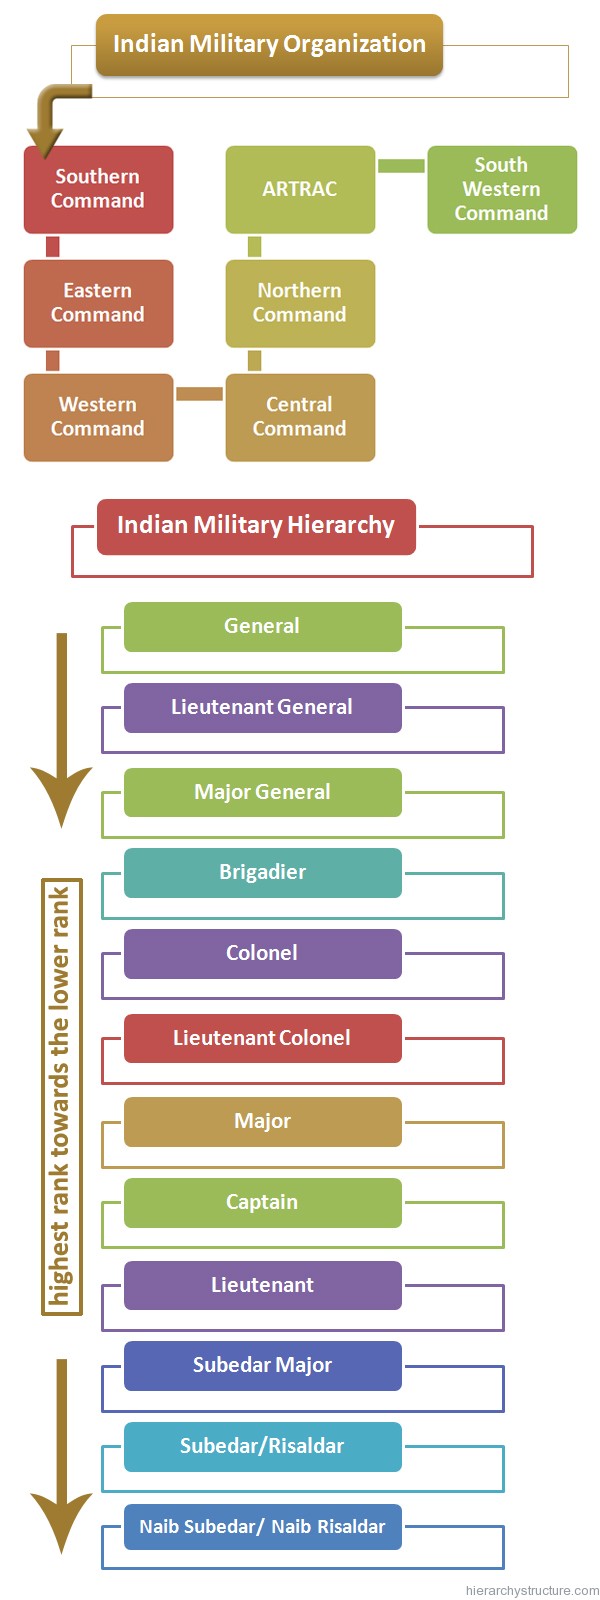 Indian Military Hierarchy